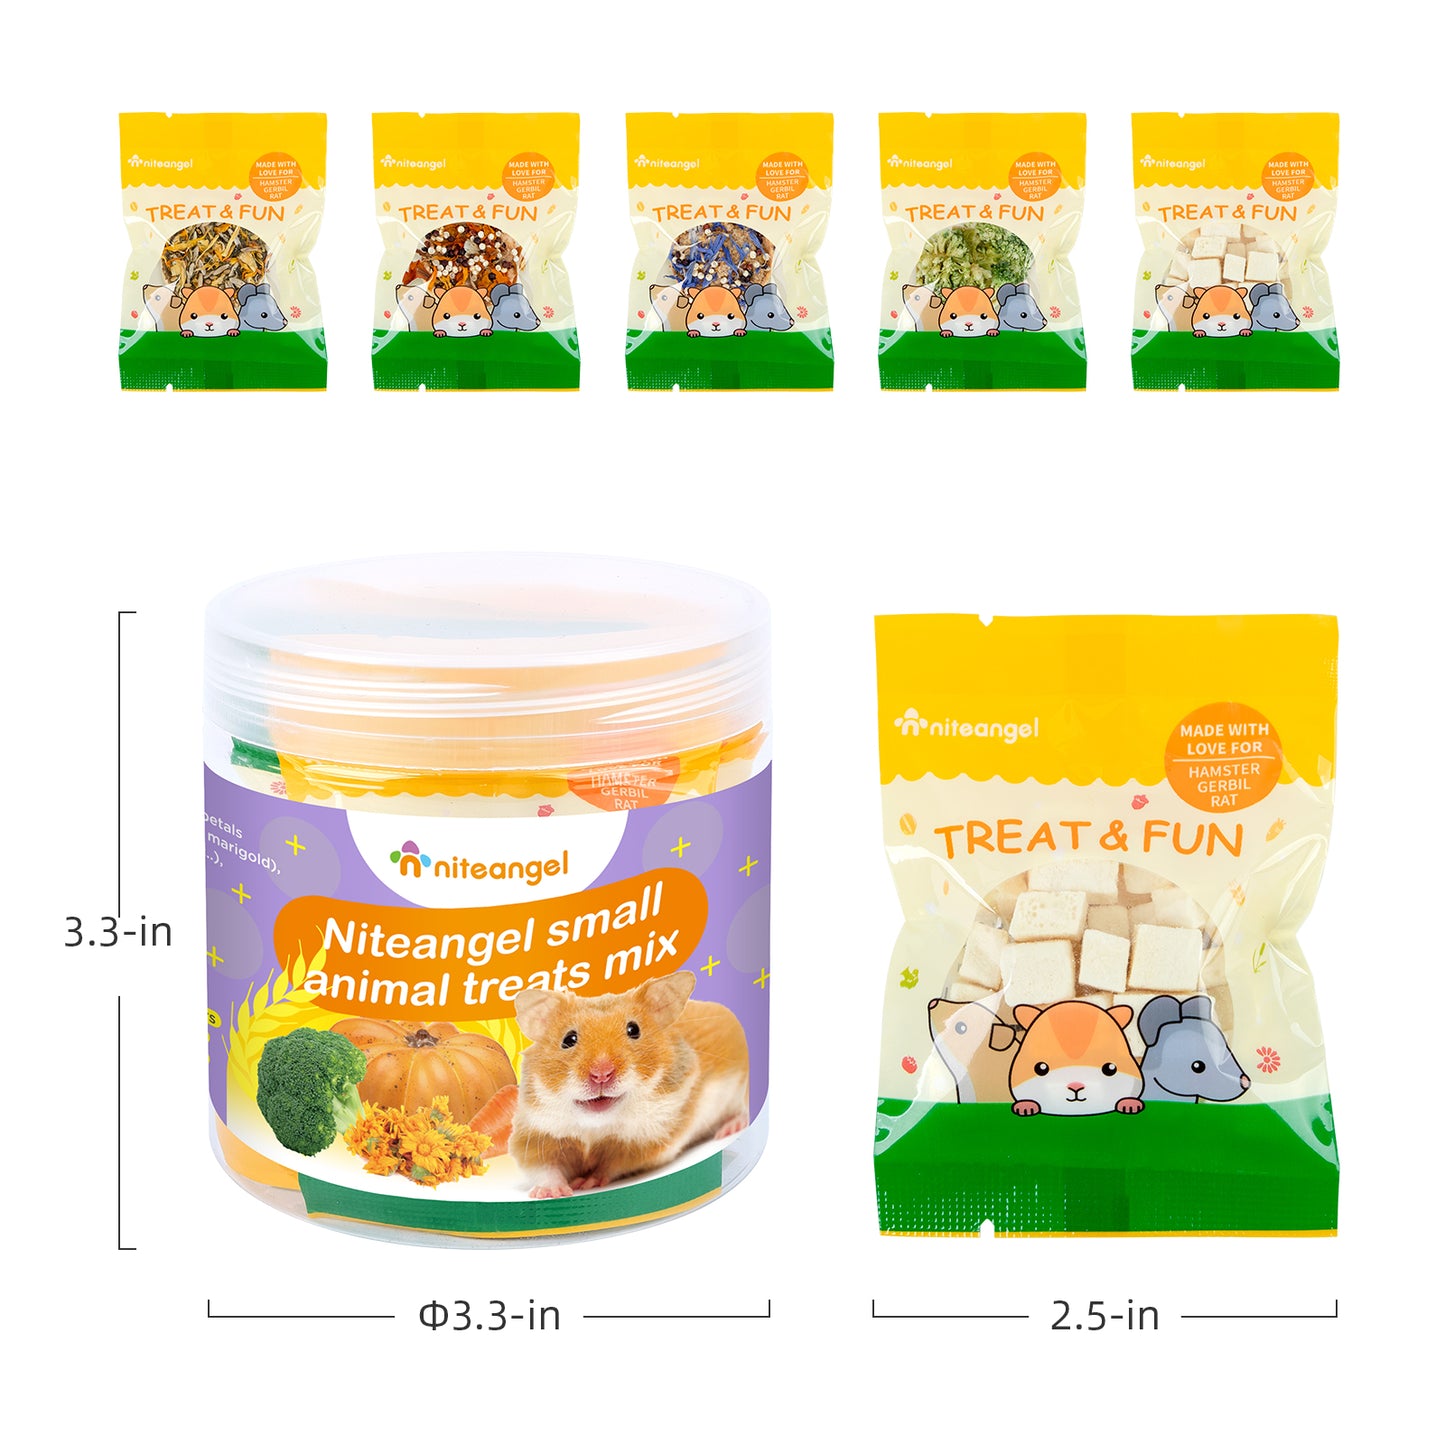 Niteangel Hamster Snack & Treats Toy: - Small Animal Natural Treat Mix for Dwarf Syrian Robo Hamsters